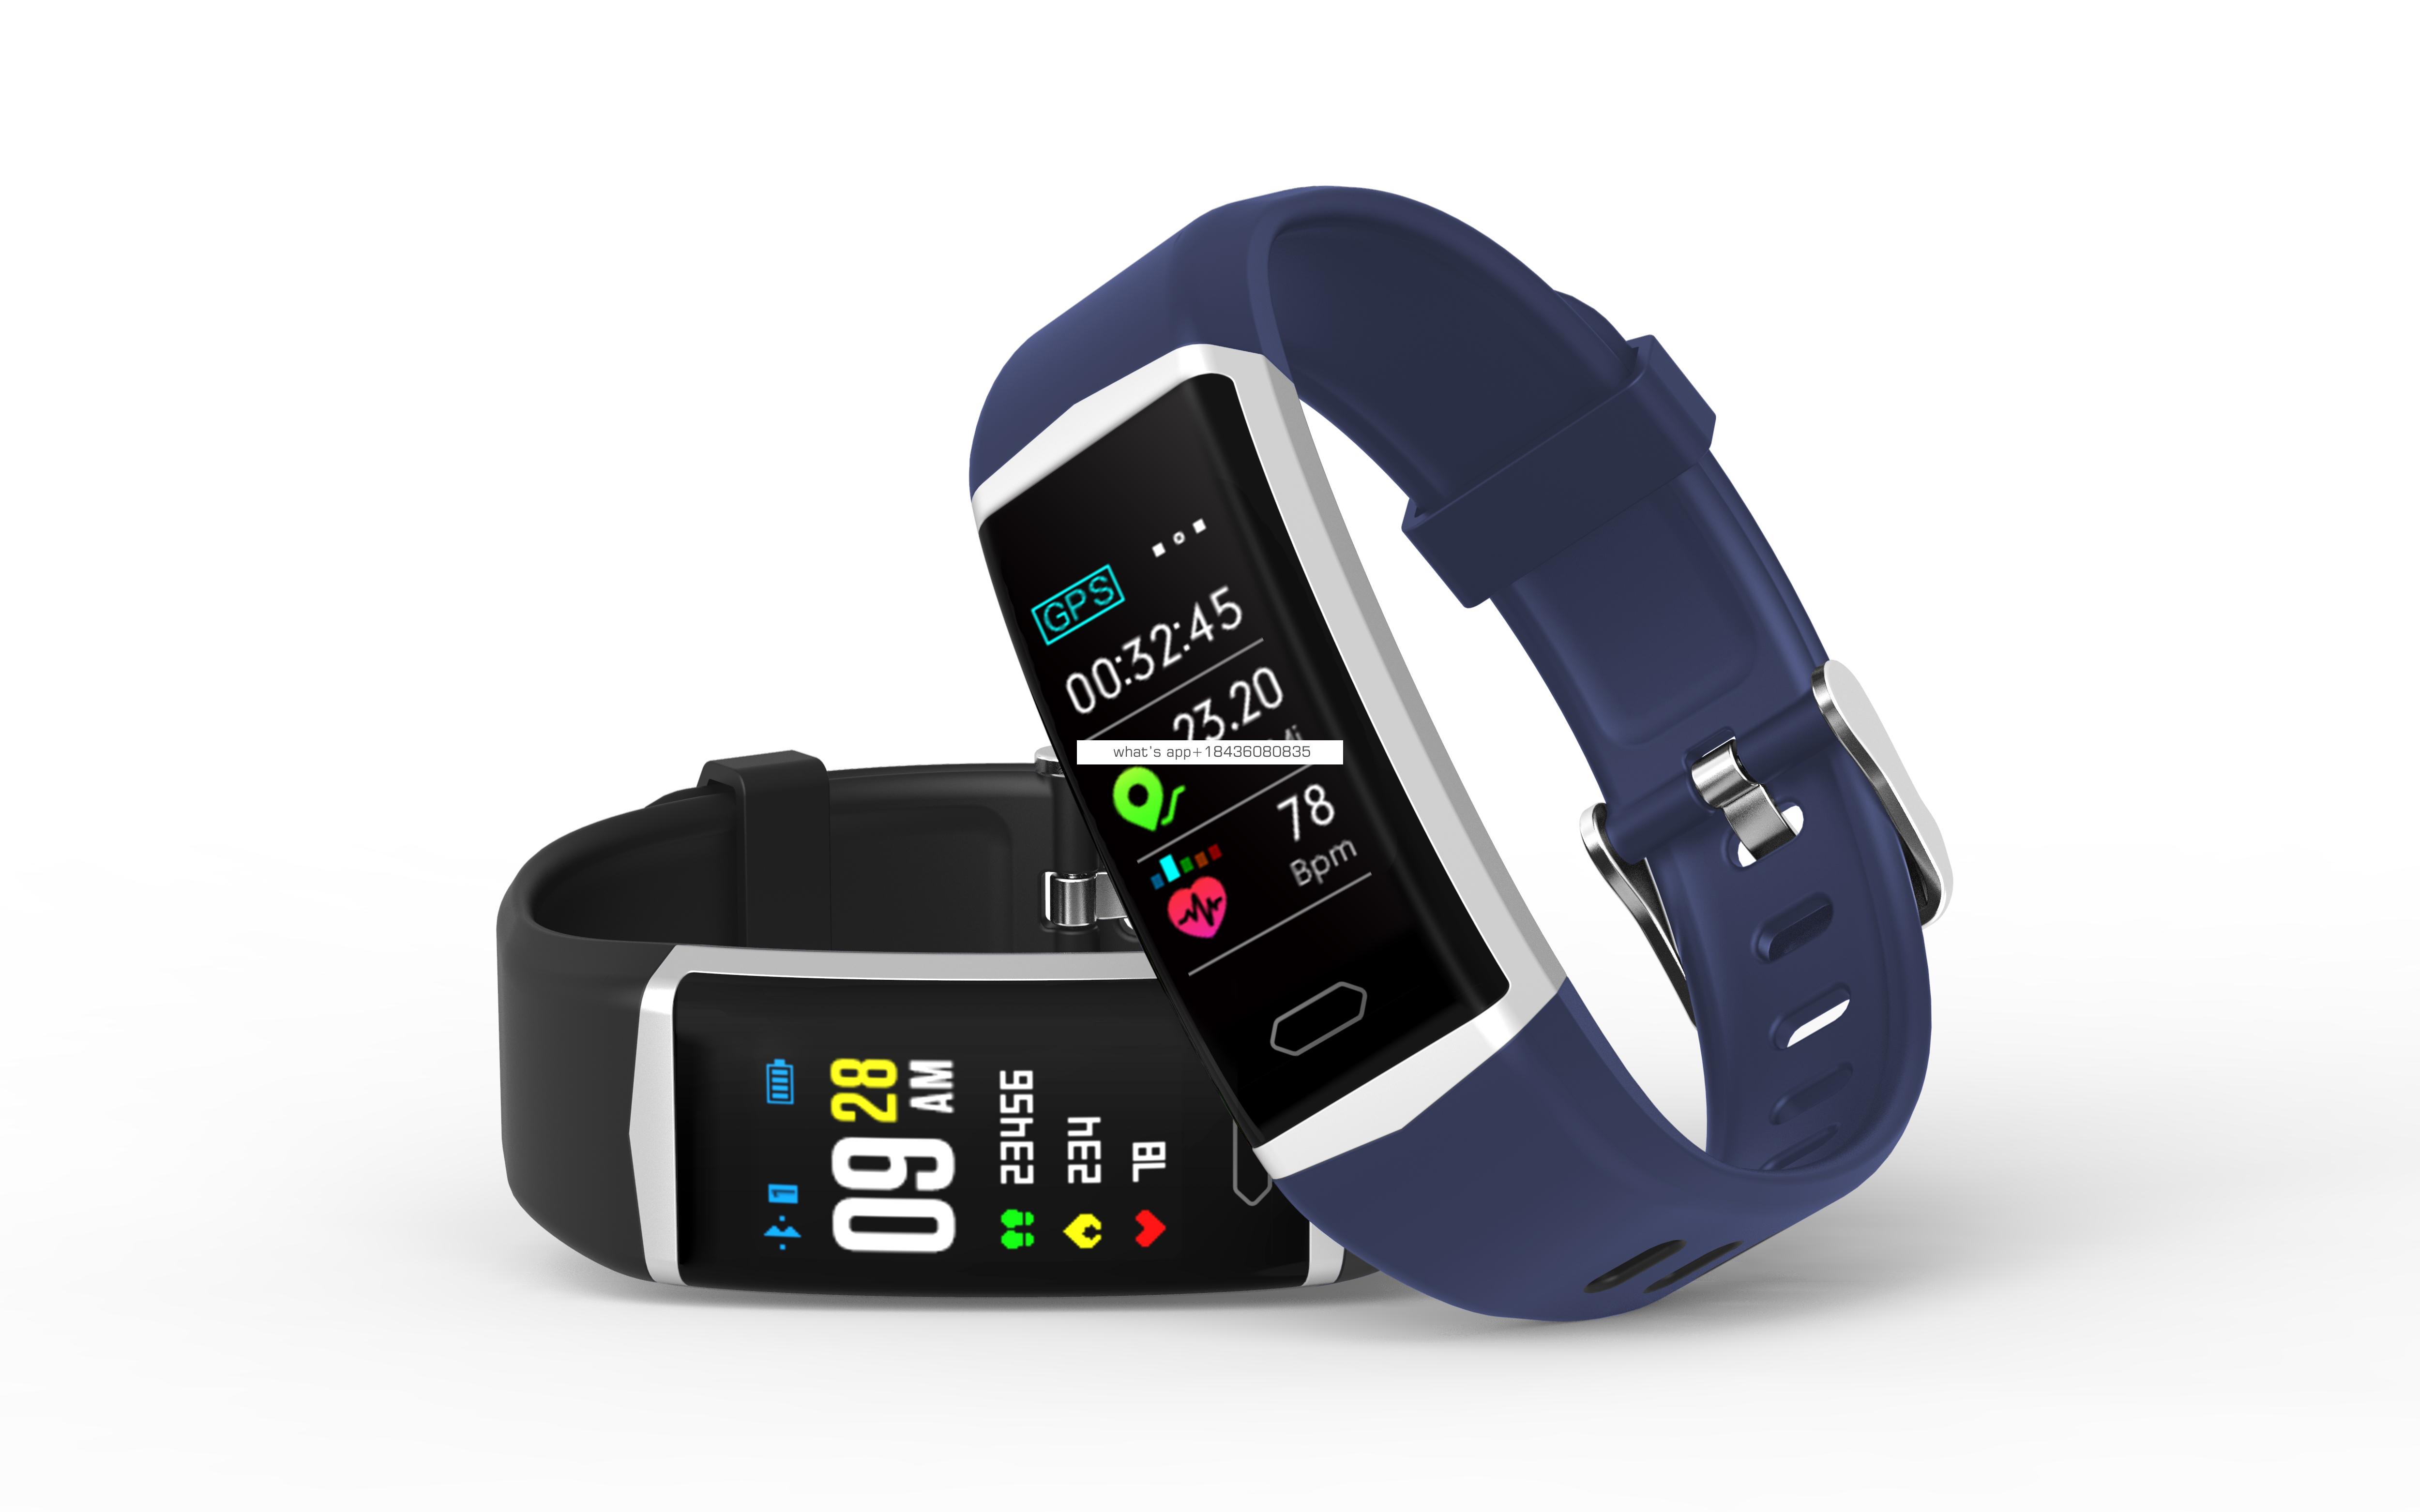 Waterproof android phone  smartwatch smart bracelet that can measure blood pressure and heart rate